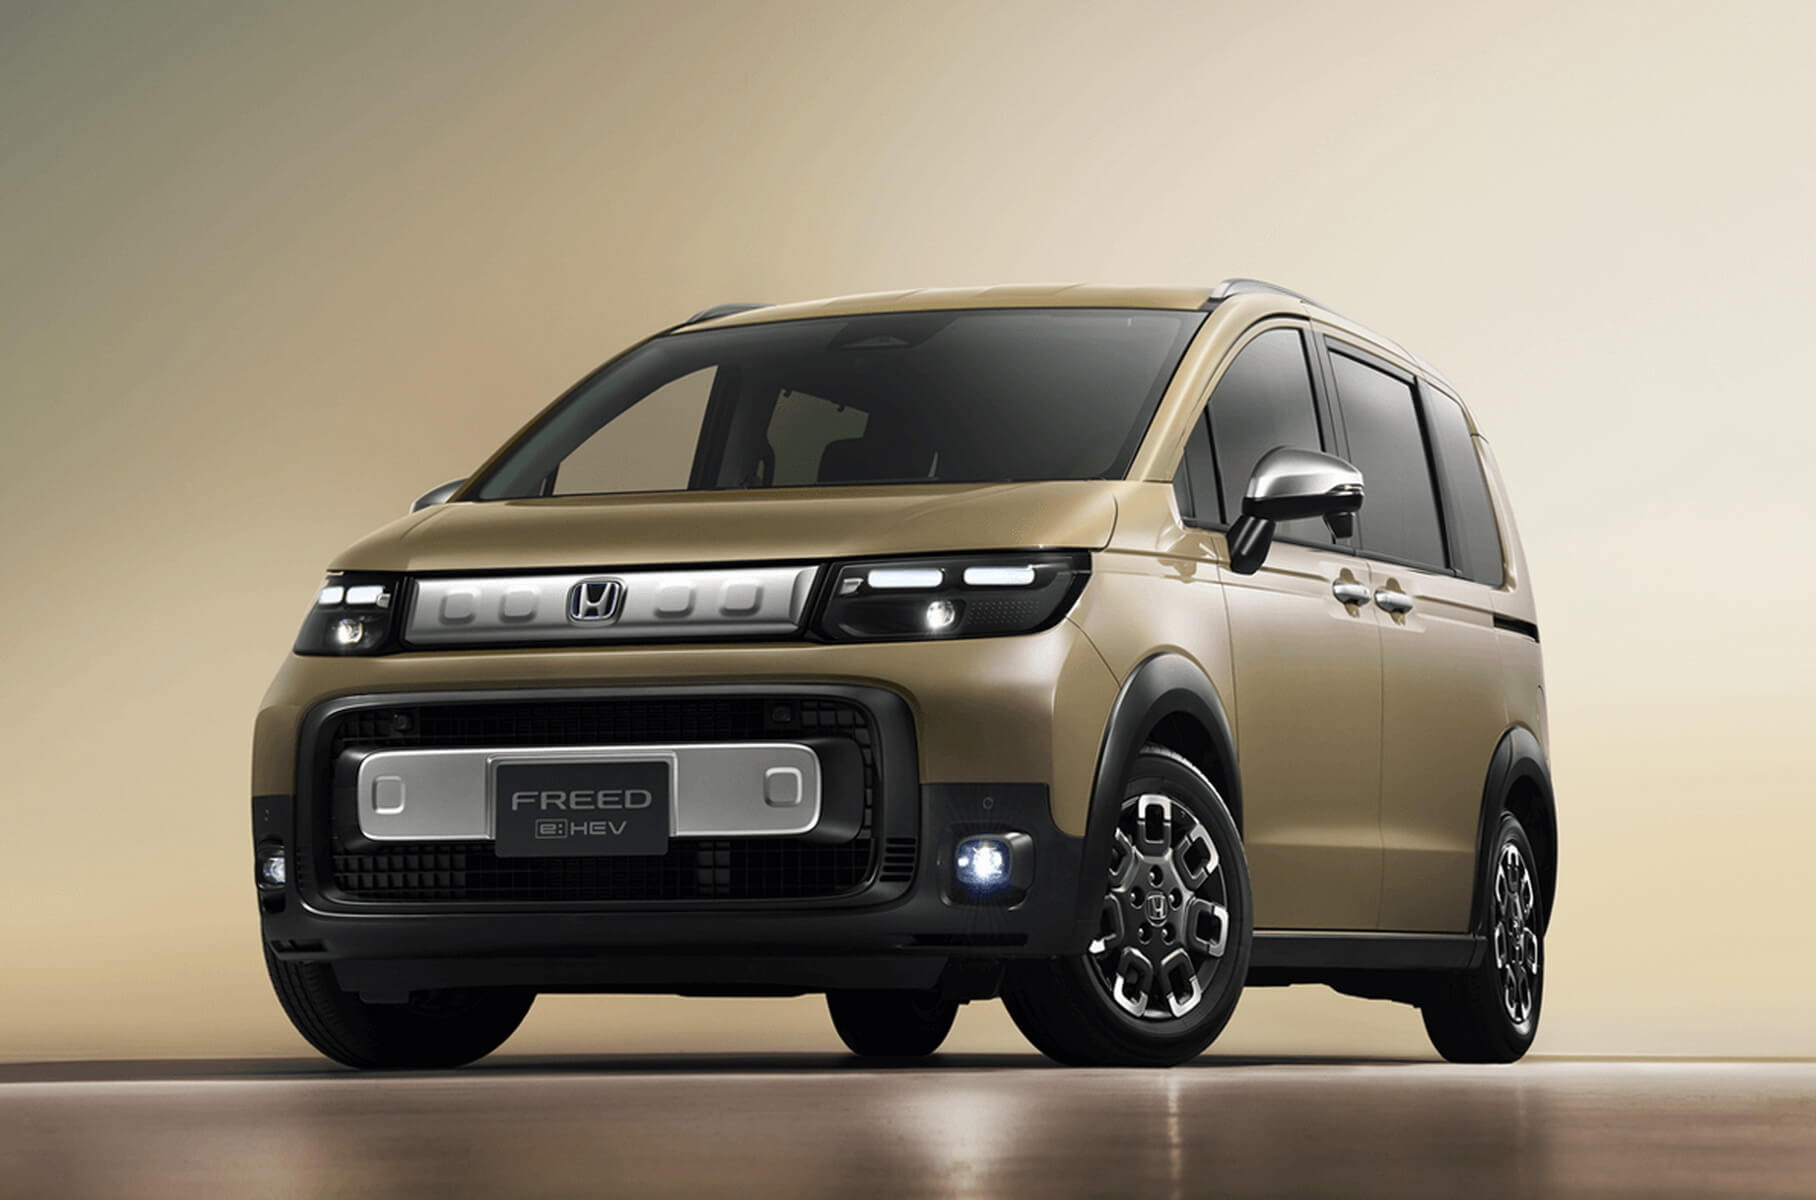 The new budget compact MPV Honda Freed impressed with the transformation of its interior